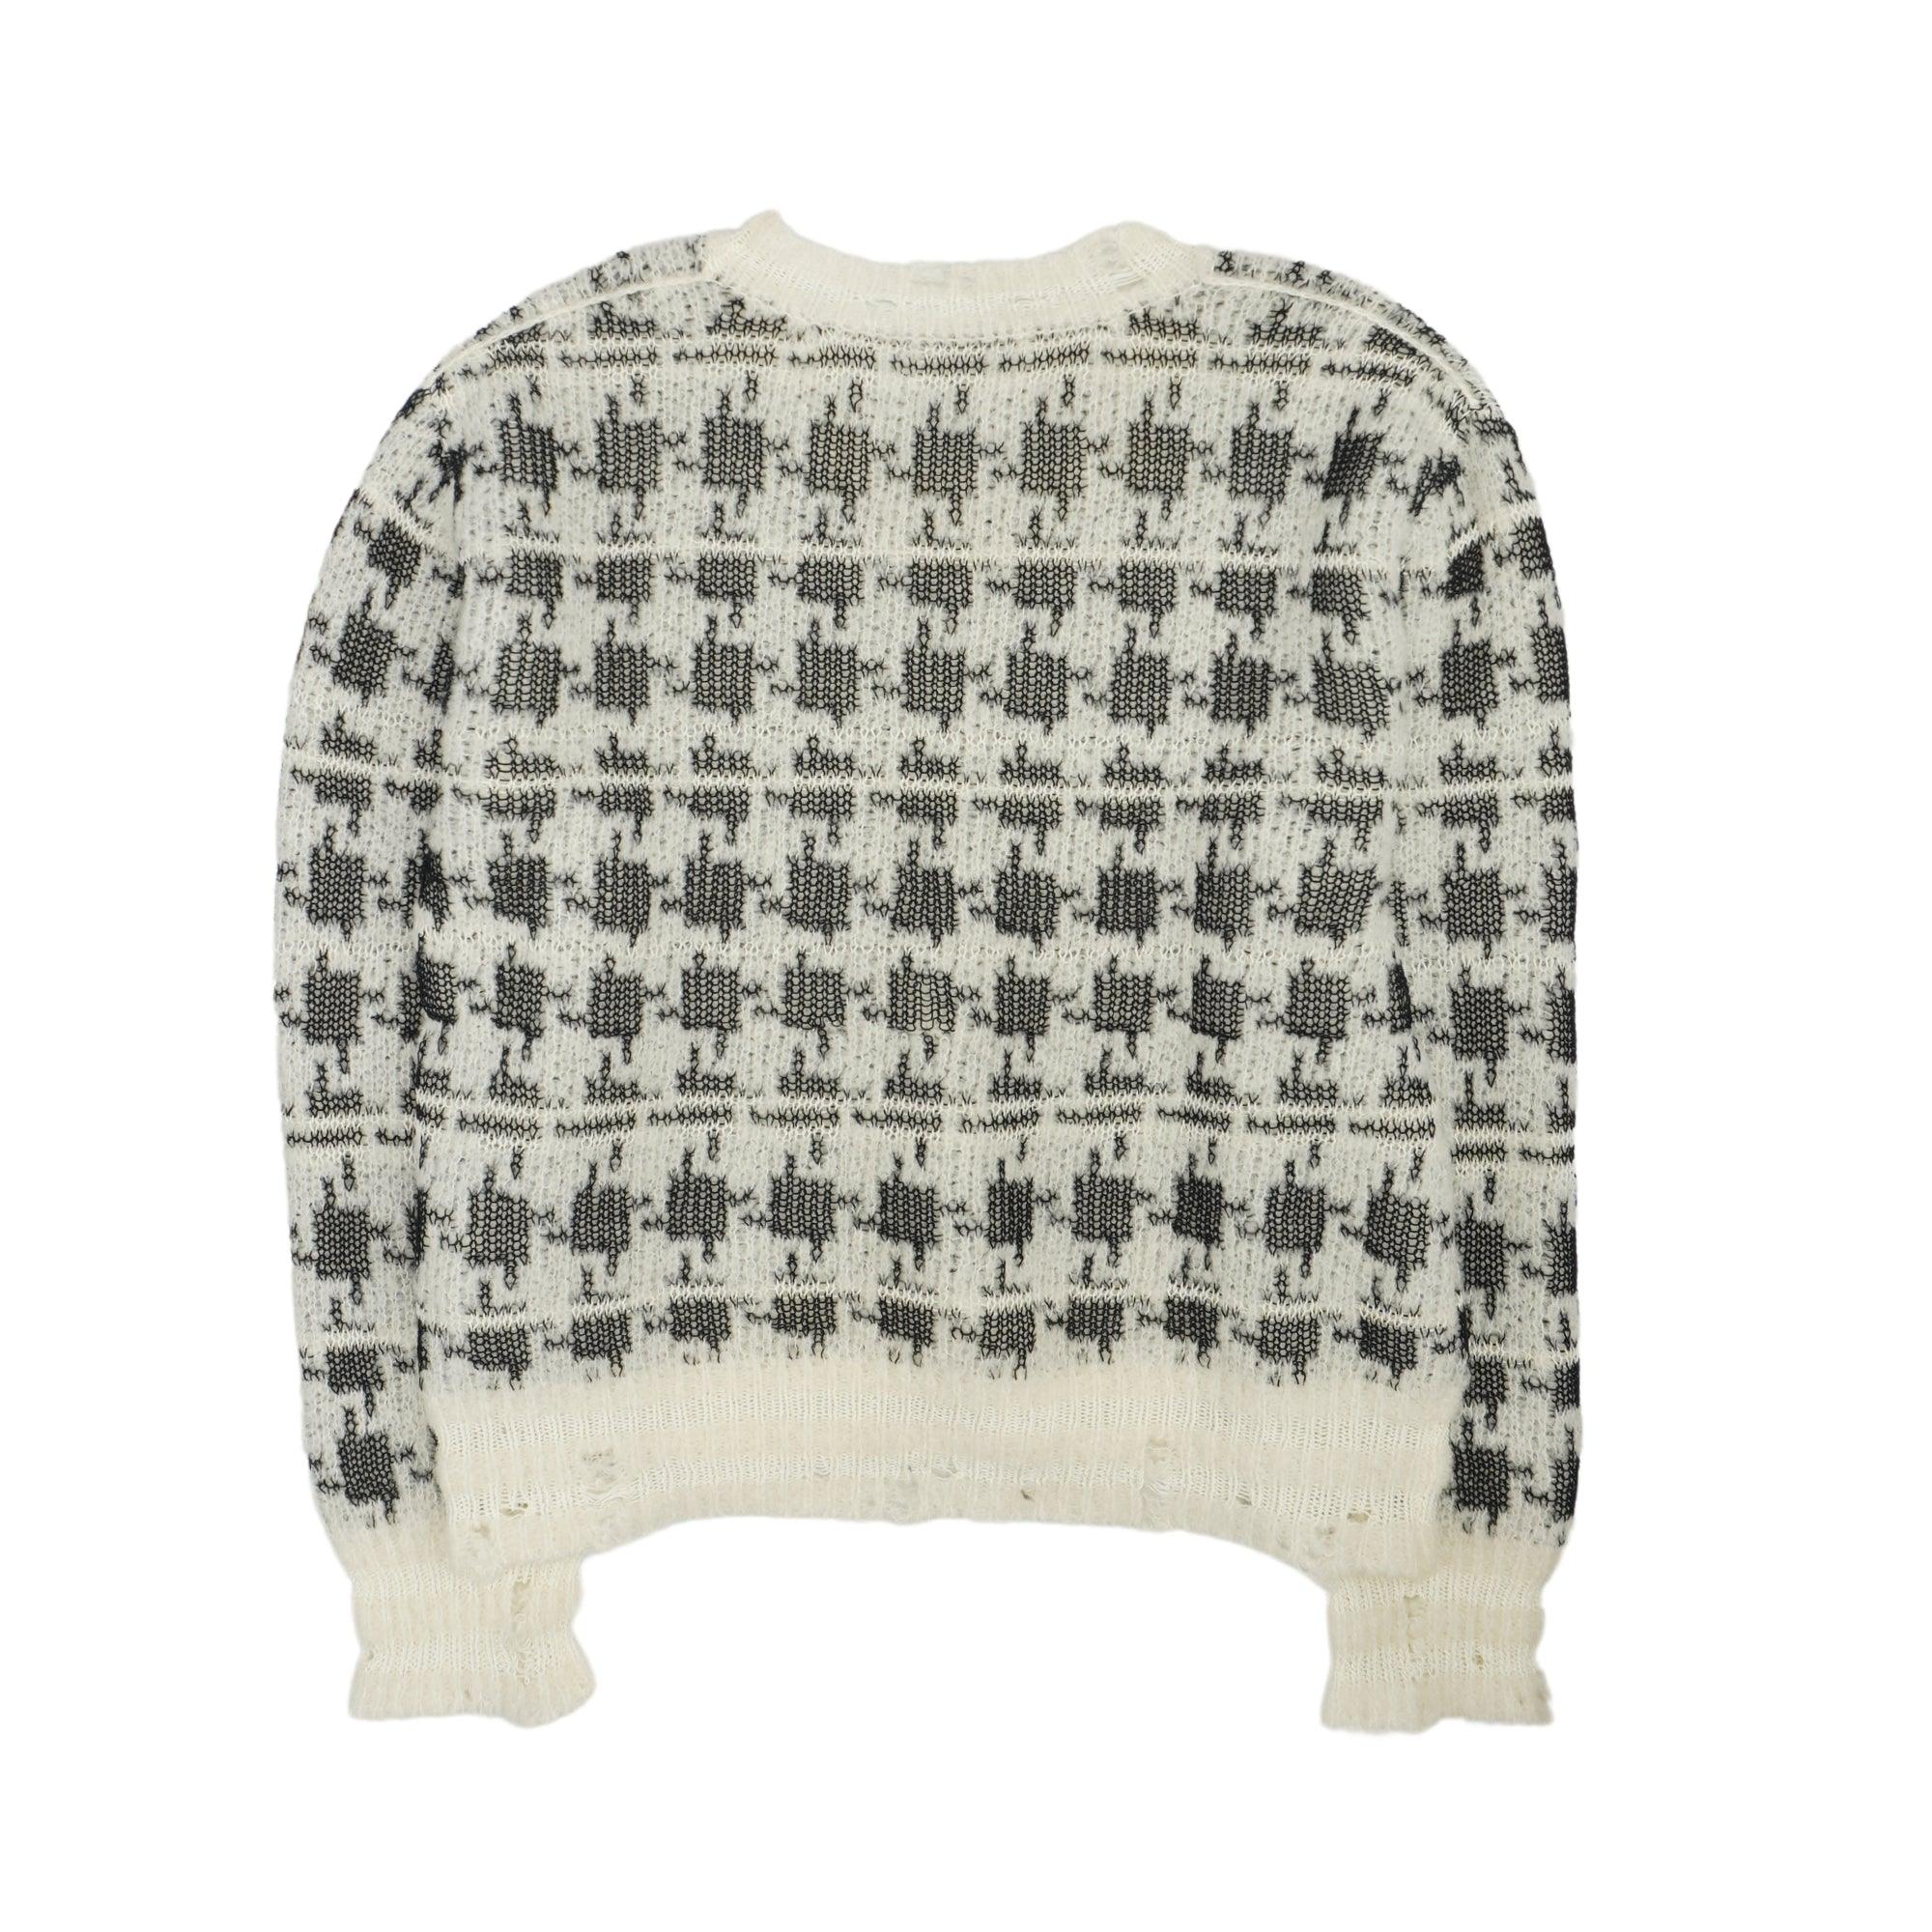 Acne Sweater - Women's XS - Fashionably Yours